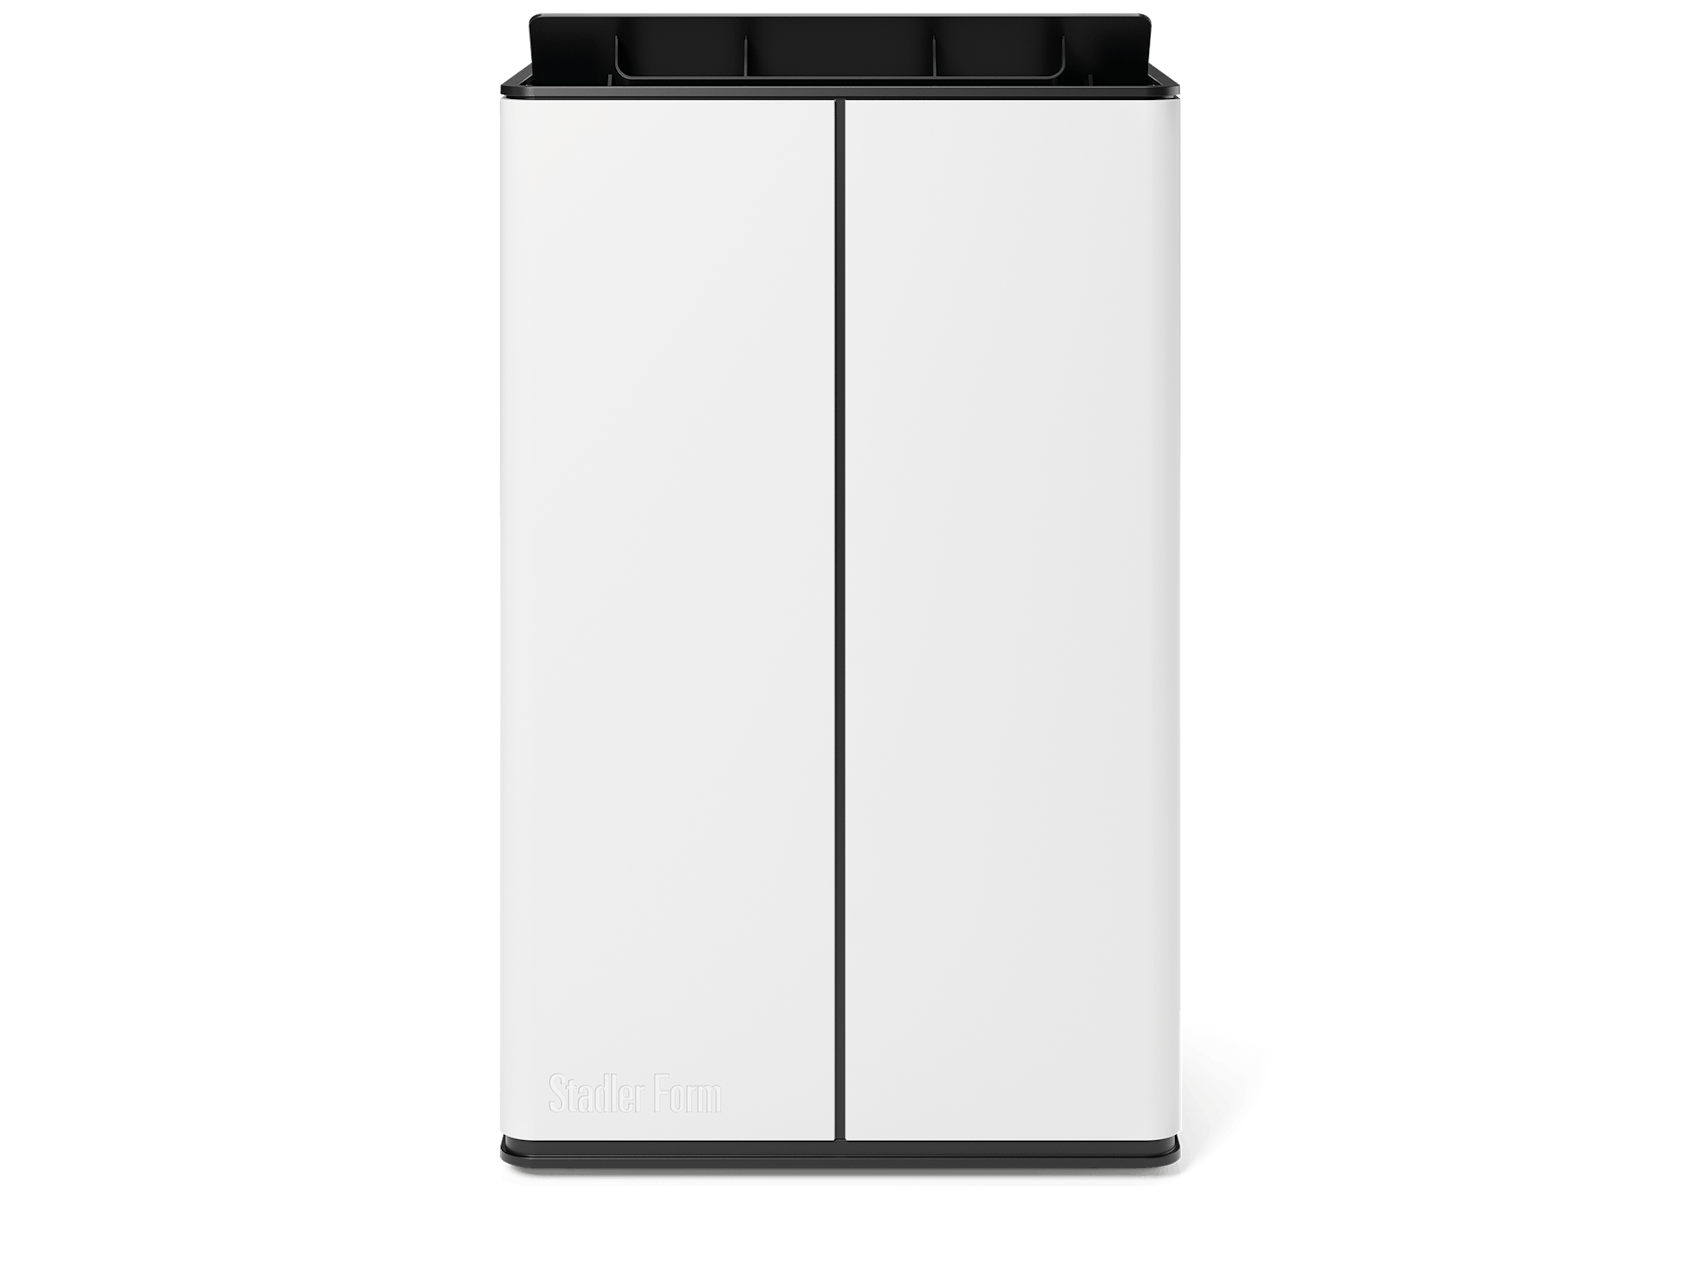 Lukas dehumidifier by Stadler Form in white as front view